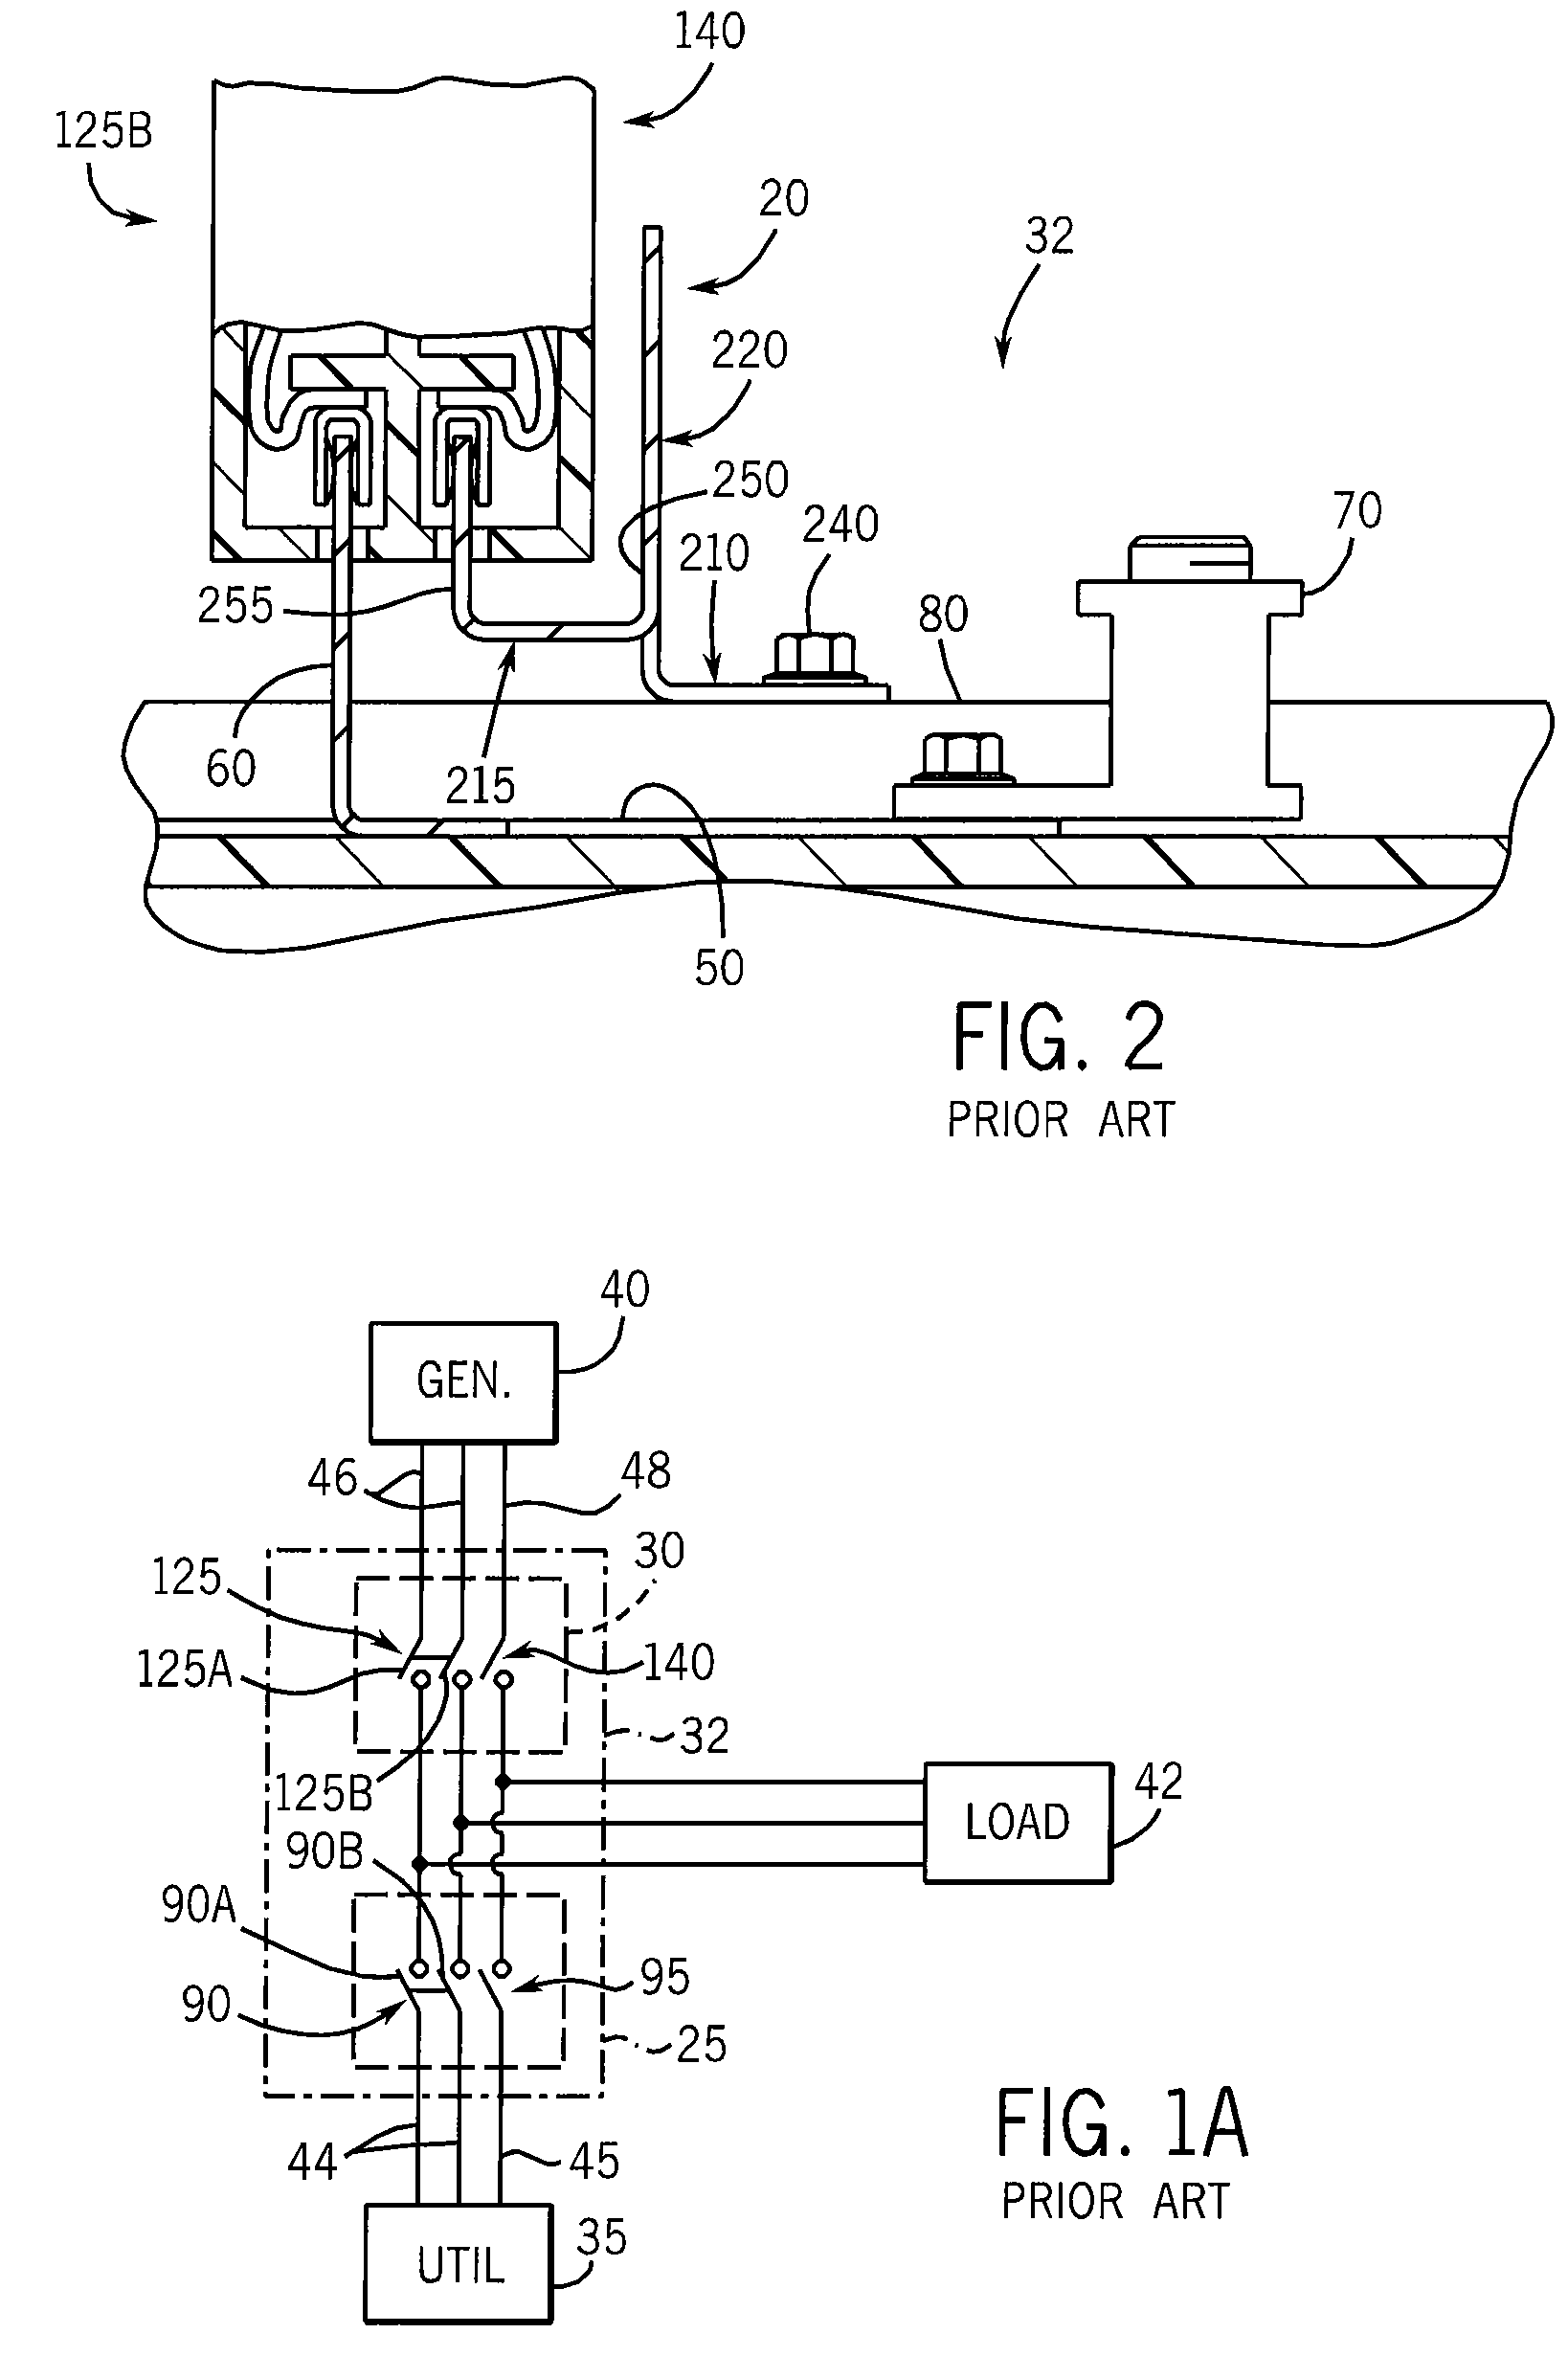 Electrical panel having electrically isolated neutral stab